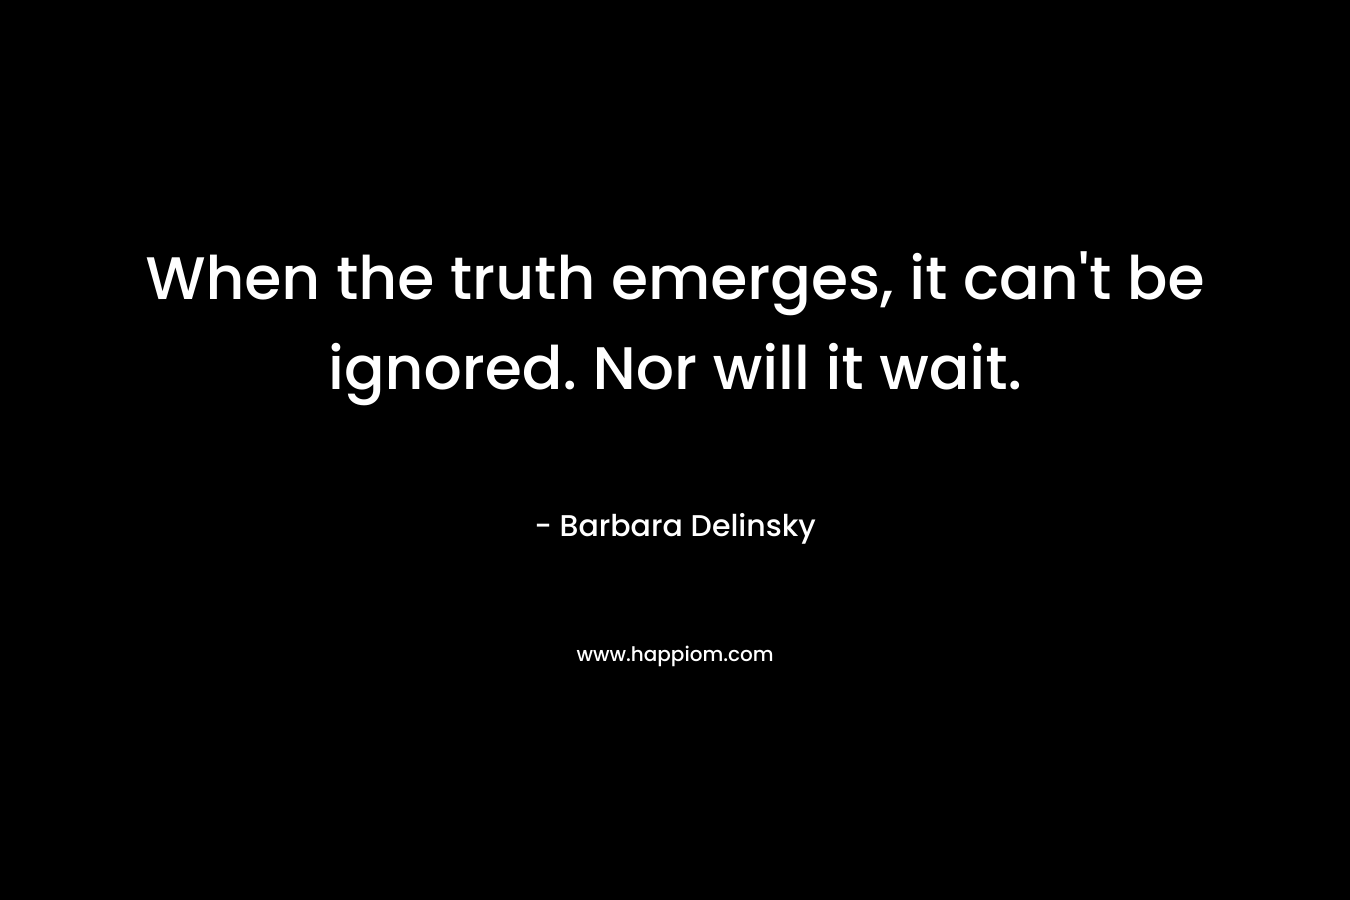 When the truth emerges, it can’t be ignored. Nor will it wait. – Barbara Delinsky